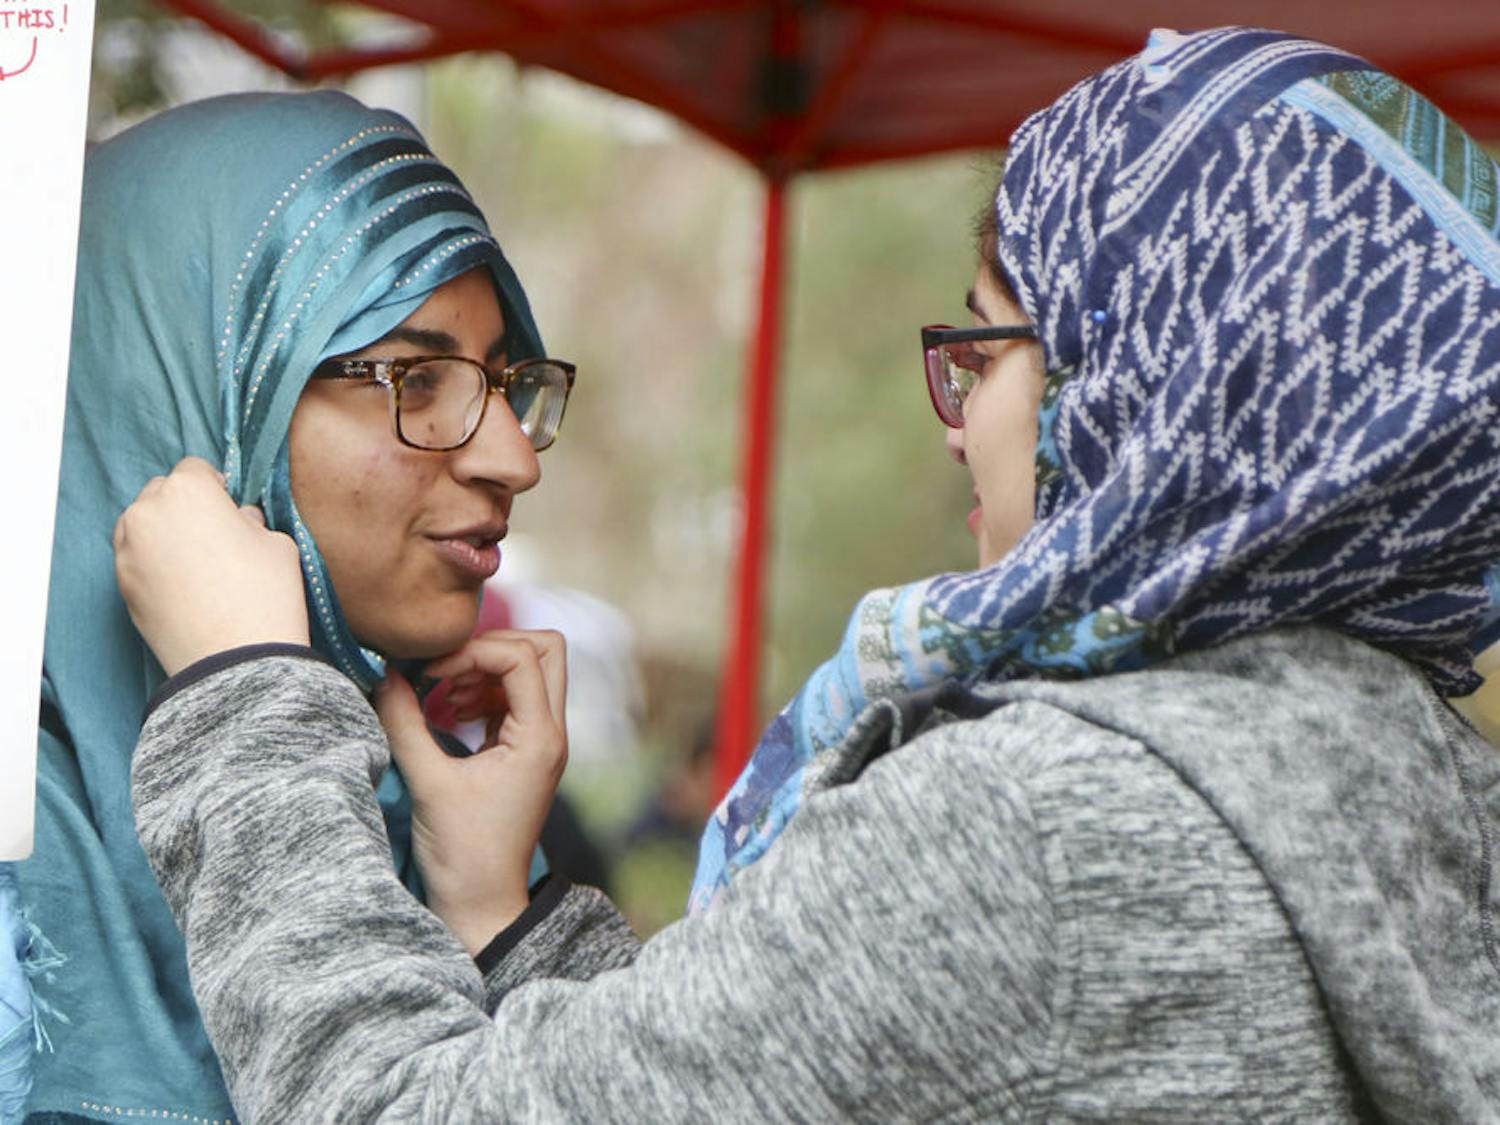 Samon Imtiaz, a 19-year-old UF biology sophomore, has a hijab put on by Mehreen Mahmood, a 21-year-old UF anthropology senior, on Turlington Plaza on February 16, 2016 as part of Islam on Campus' Islam Appreciation Month.